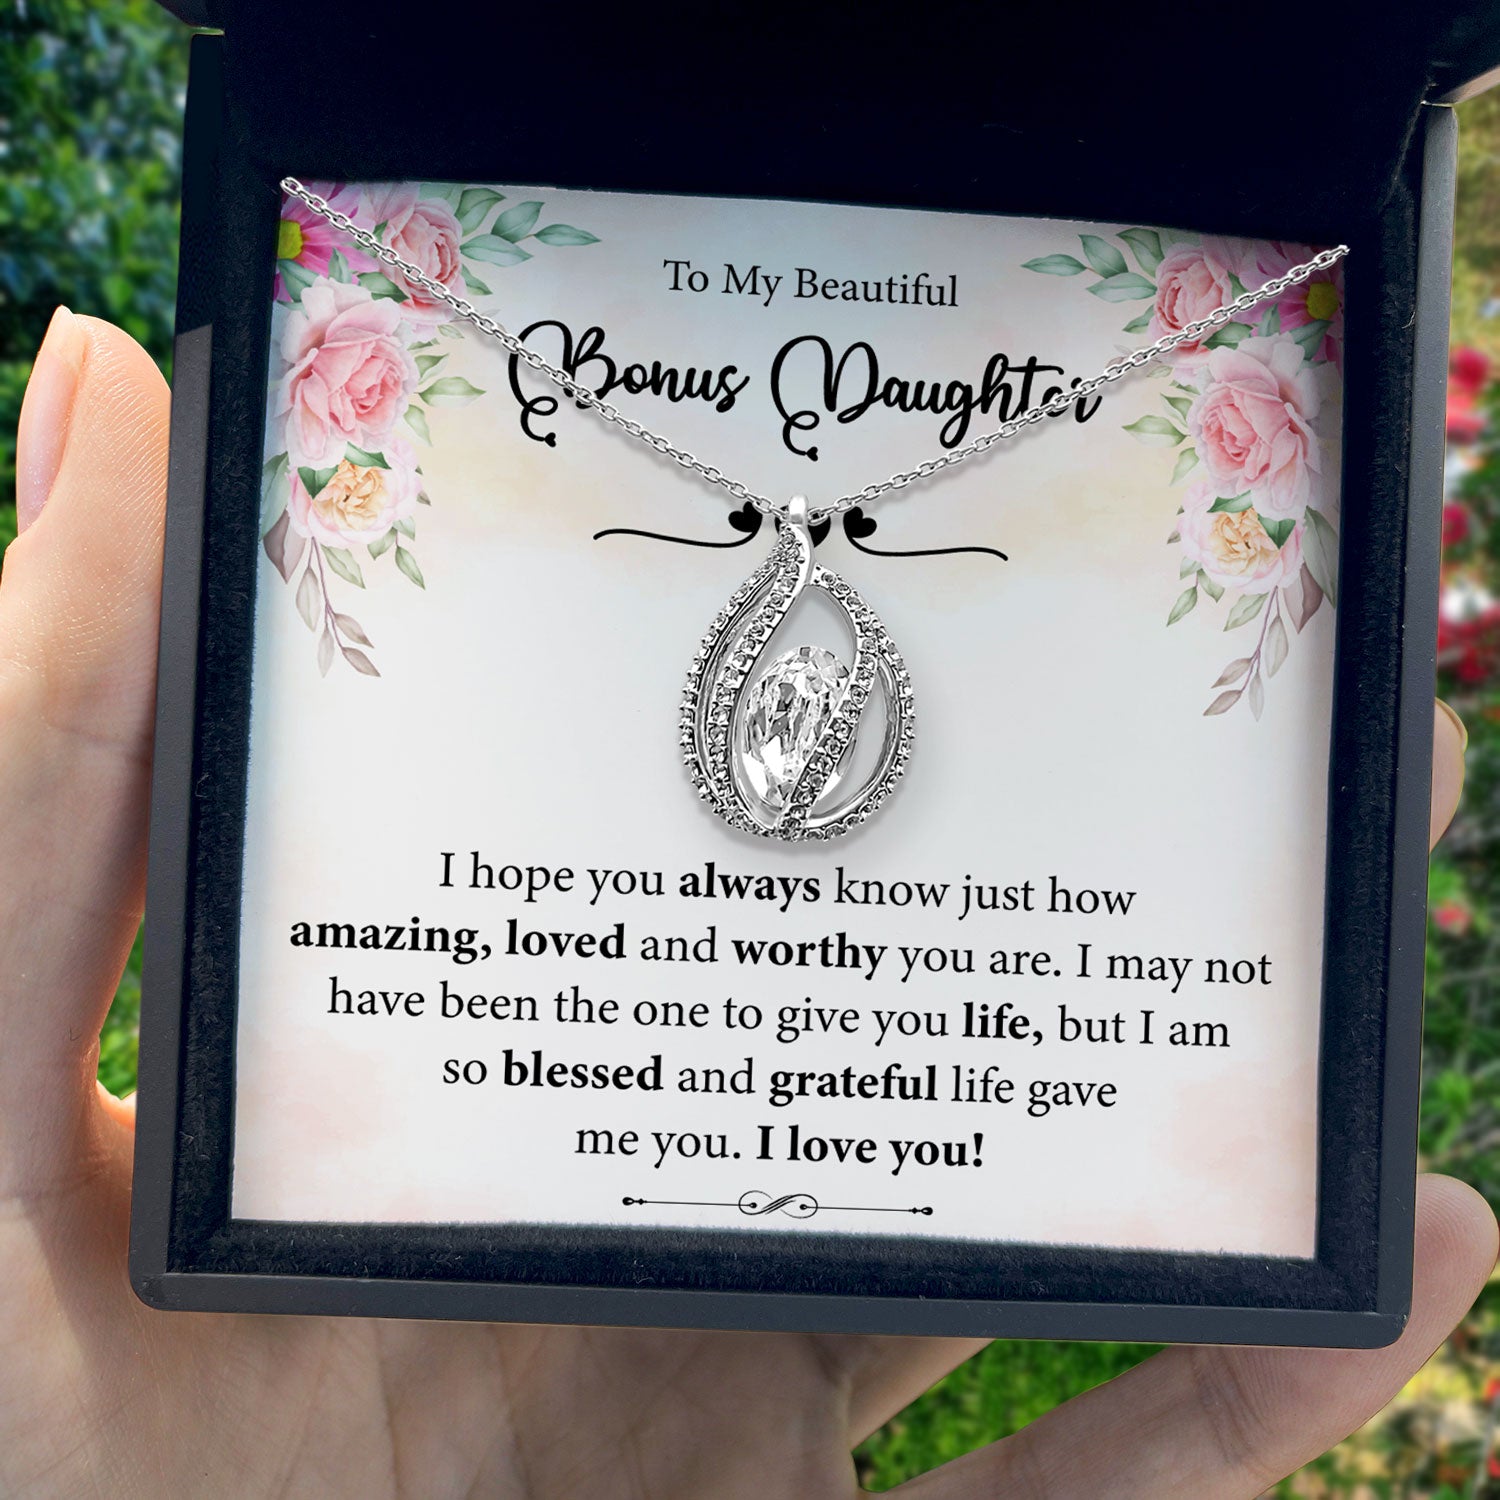 To My Beautiful Bonus Daughter - I am So Blessed Life Gave Me You - Orbital Birdcage Necklace